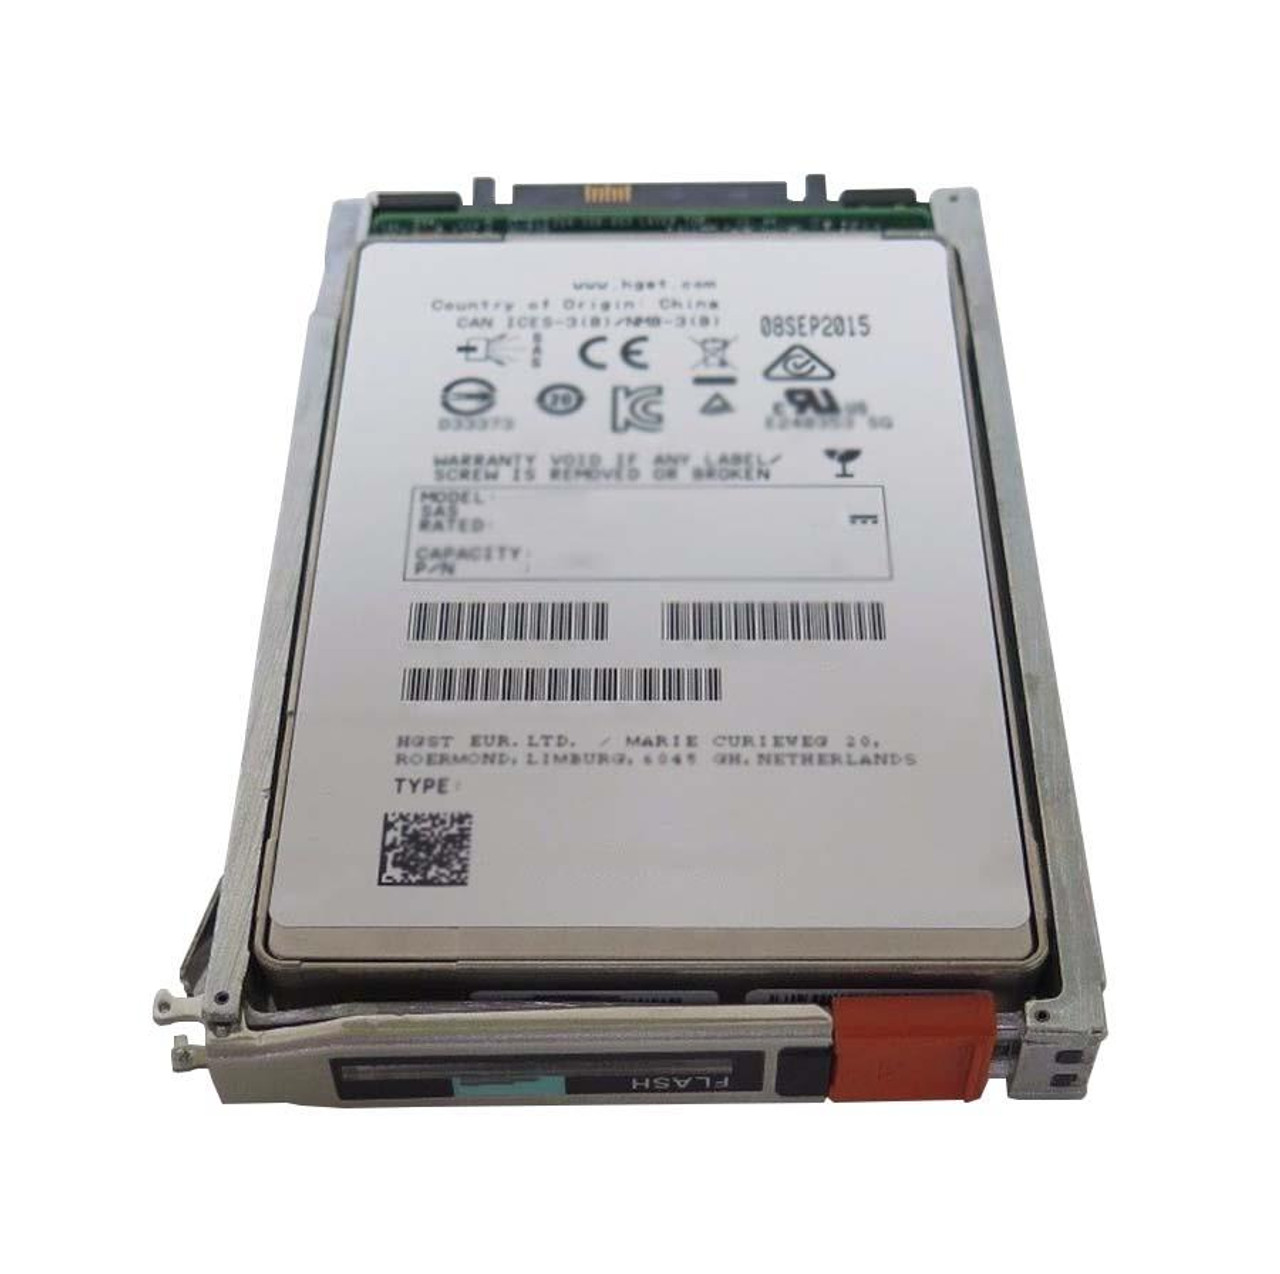 HL6FM8001BT4 EMC 800GB SAS 6Gbps 2.5-inch Internal Solid State Drive (SSD) with RAID1 for VMAX 400K